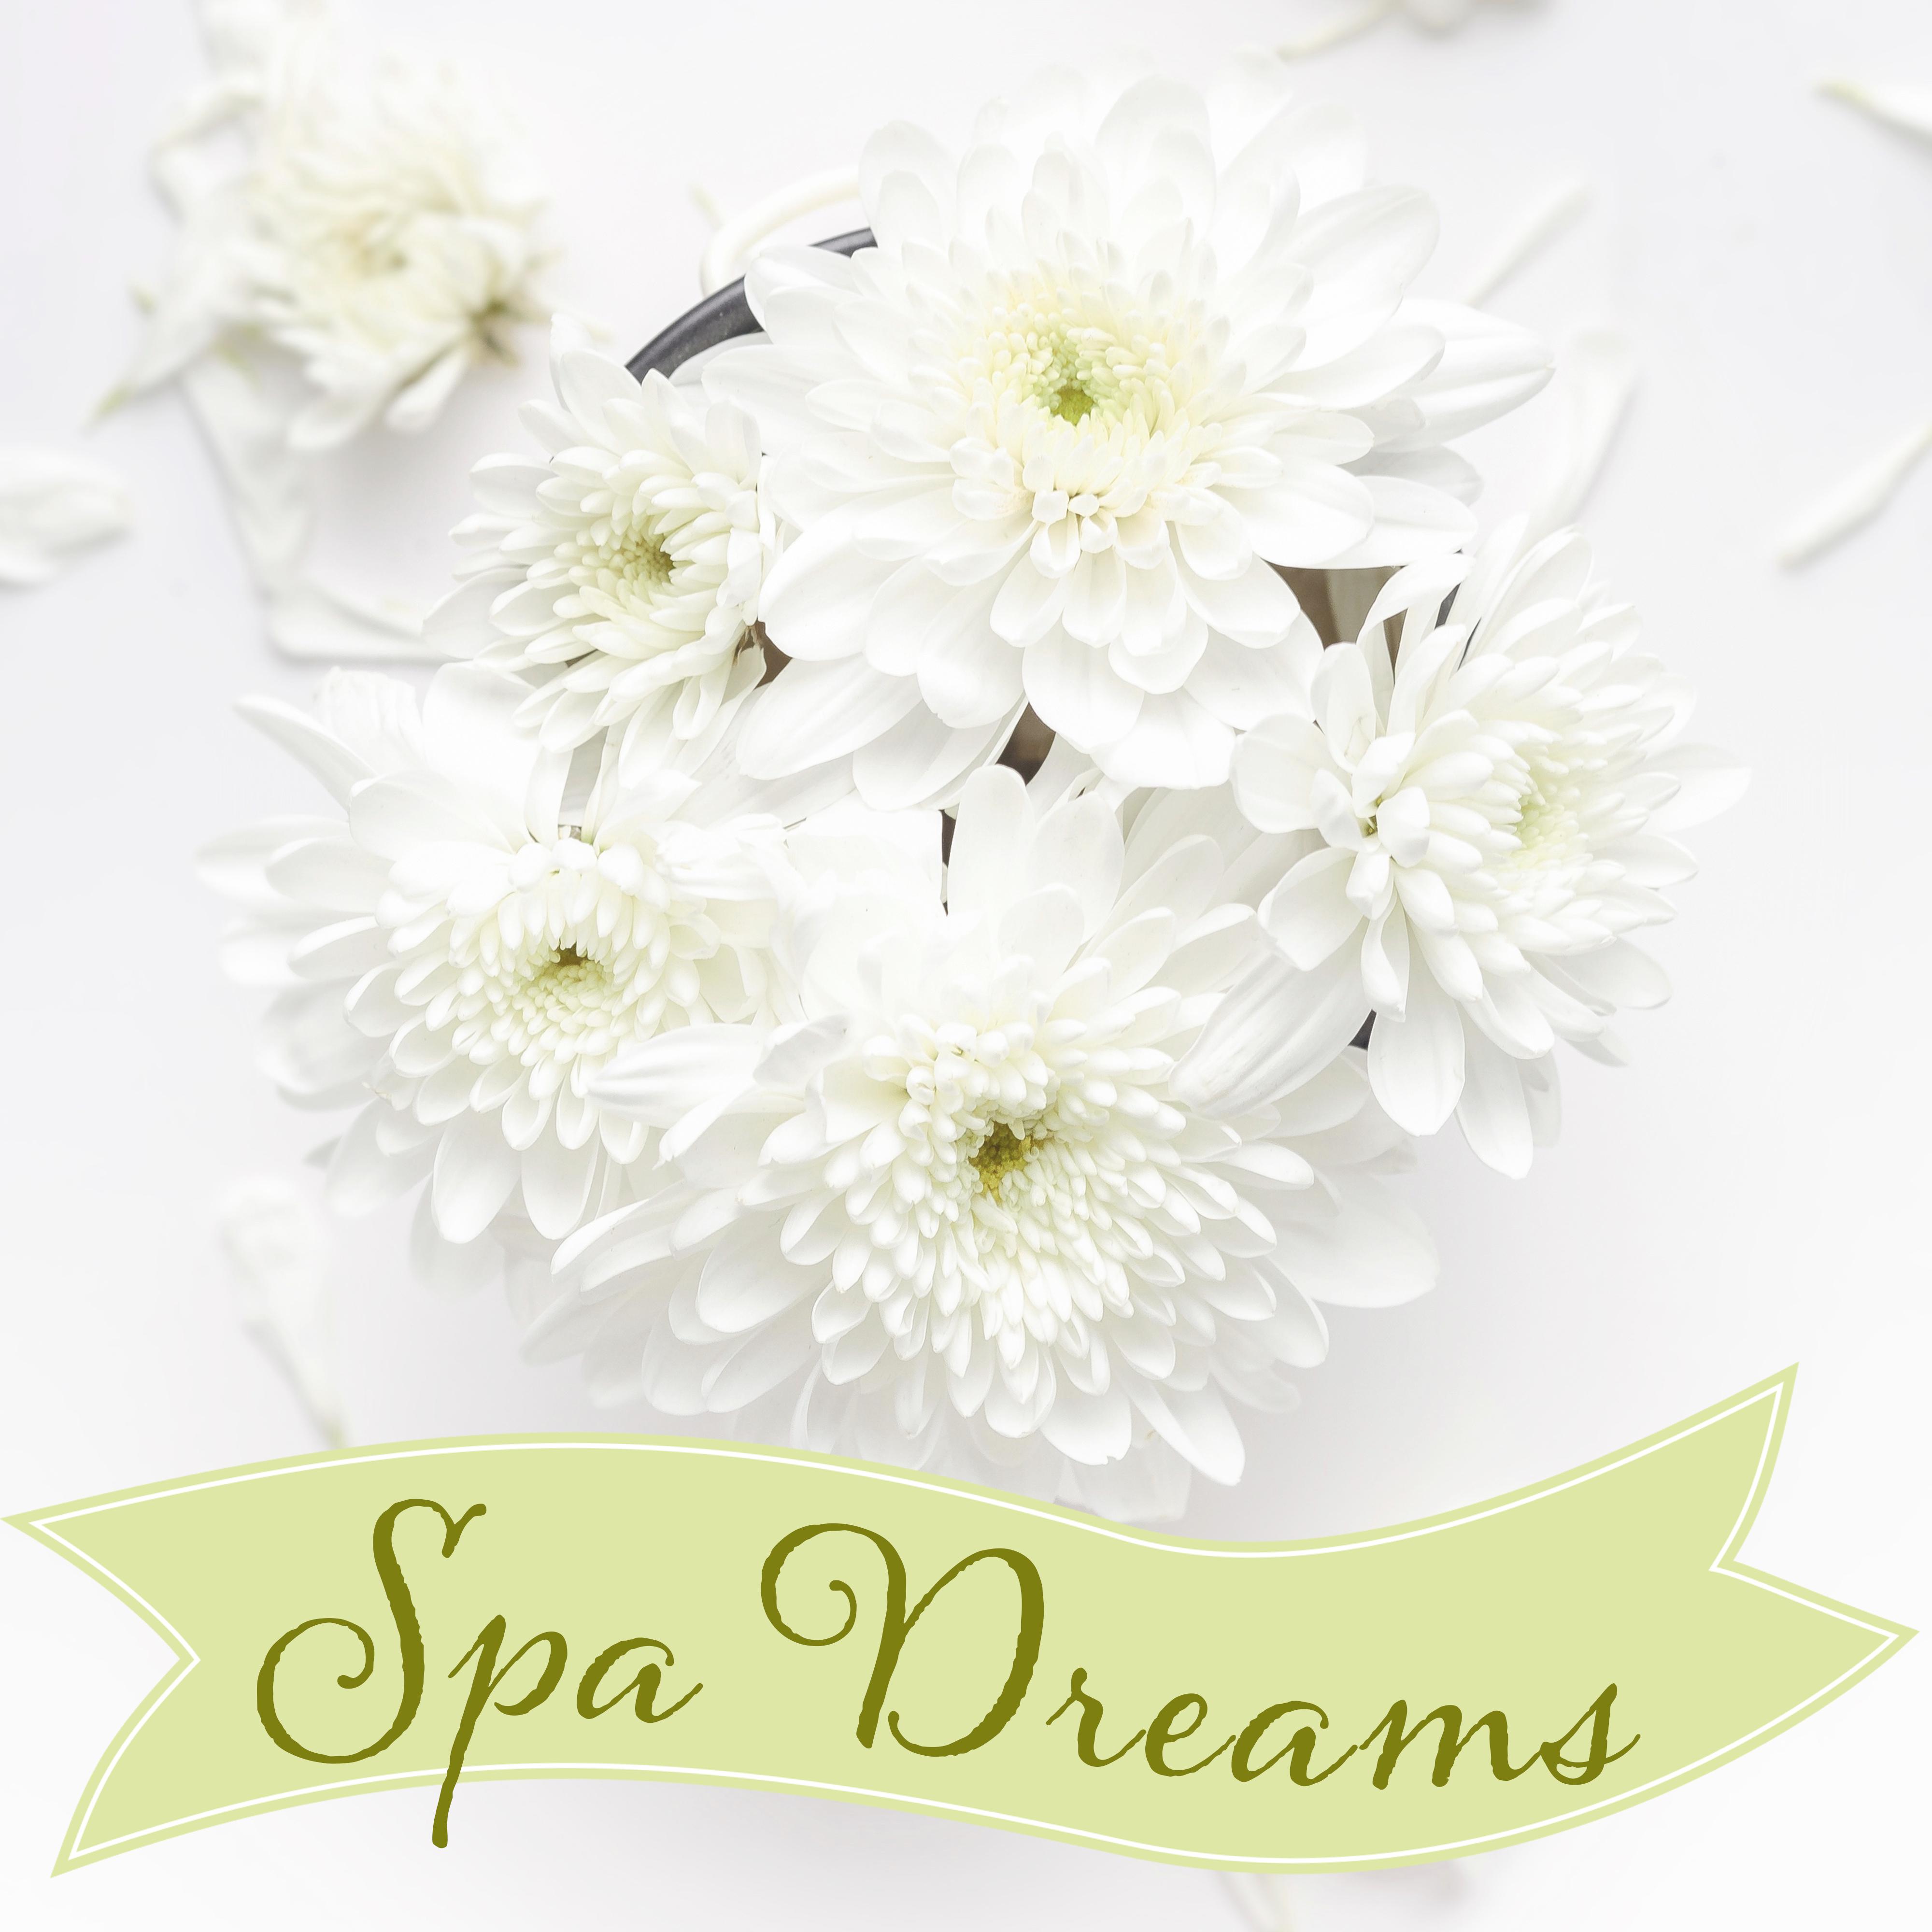 Spa Dreams  Best Relaxation, New Age, Sounds of Nature, Calm Down  Relax, Rest, Pure Mind